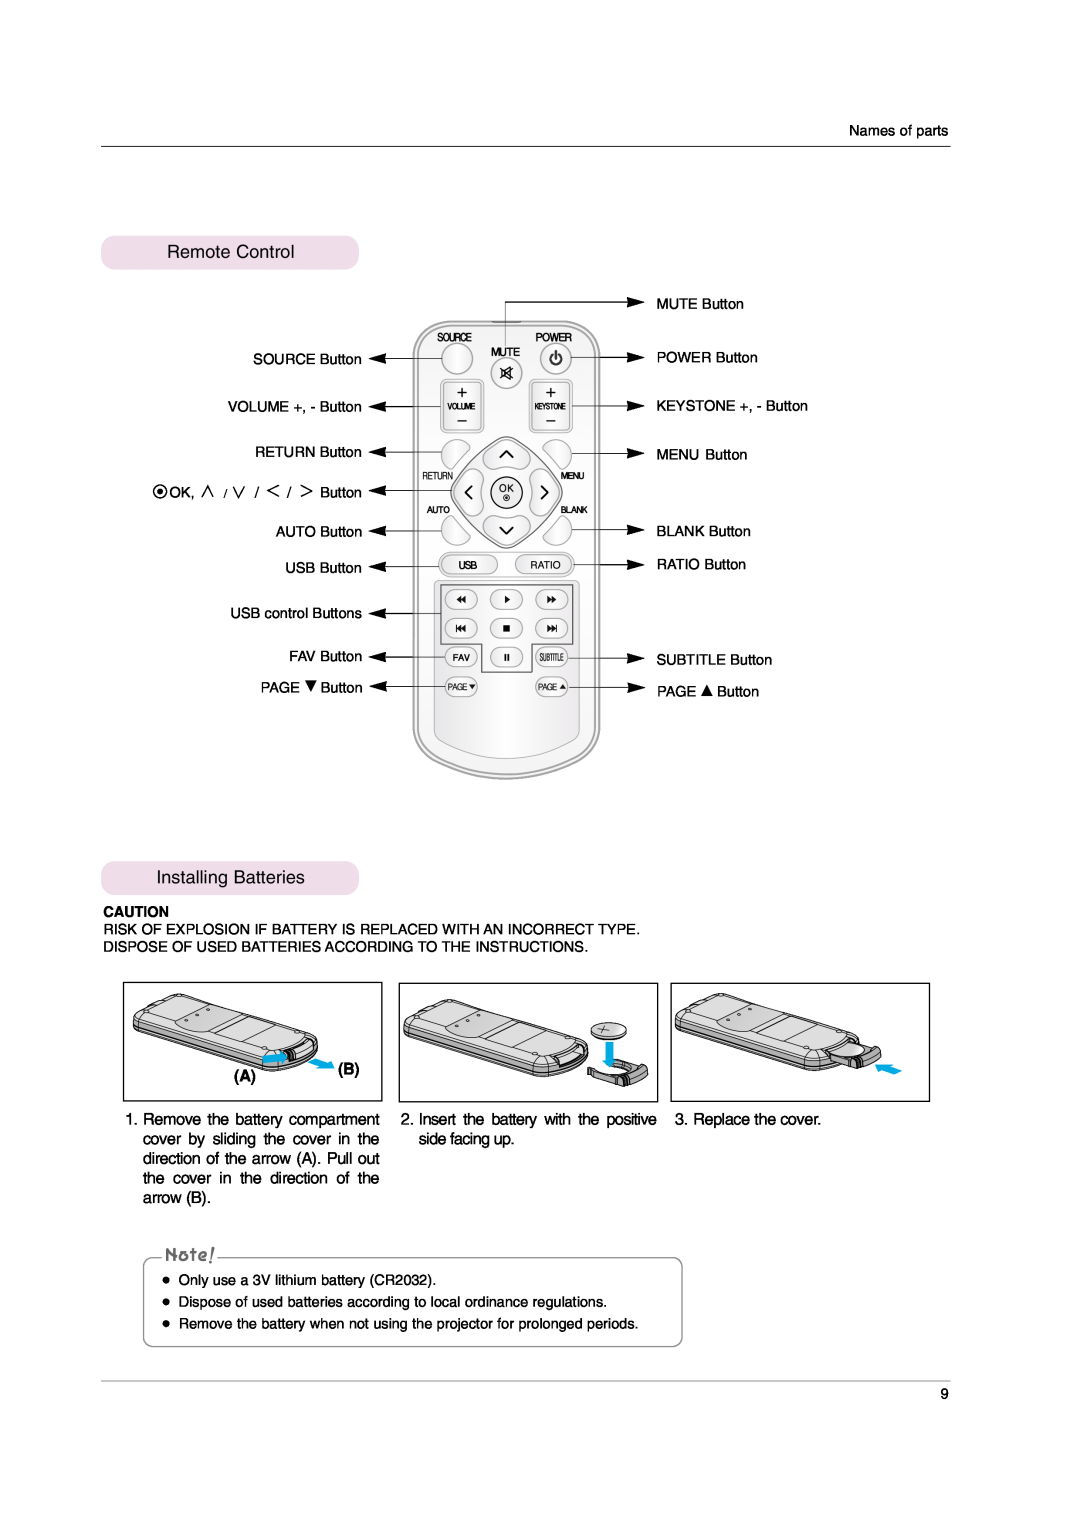 LG Electronics HS102 owner manual Remote Control, Installing Batteries 